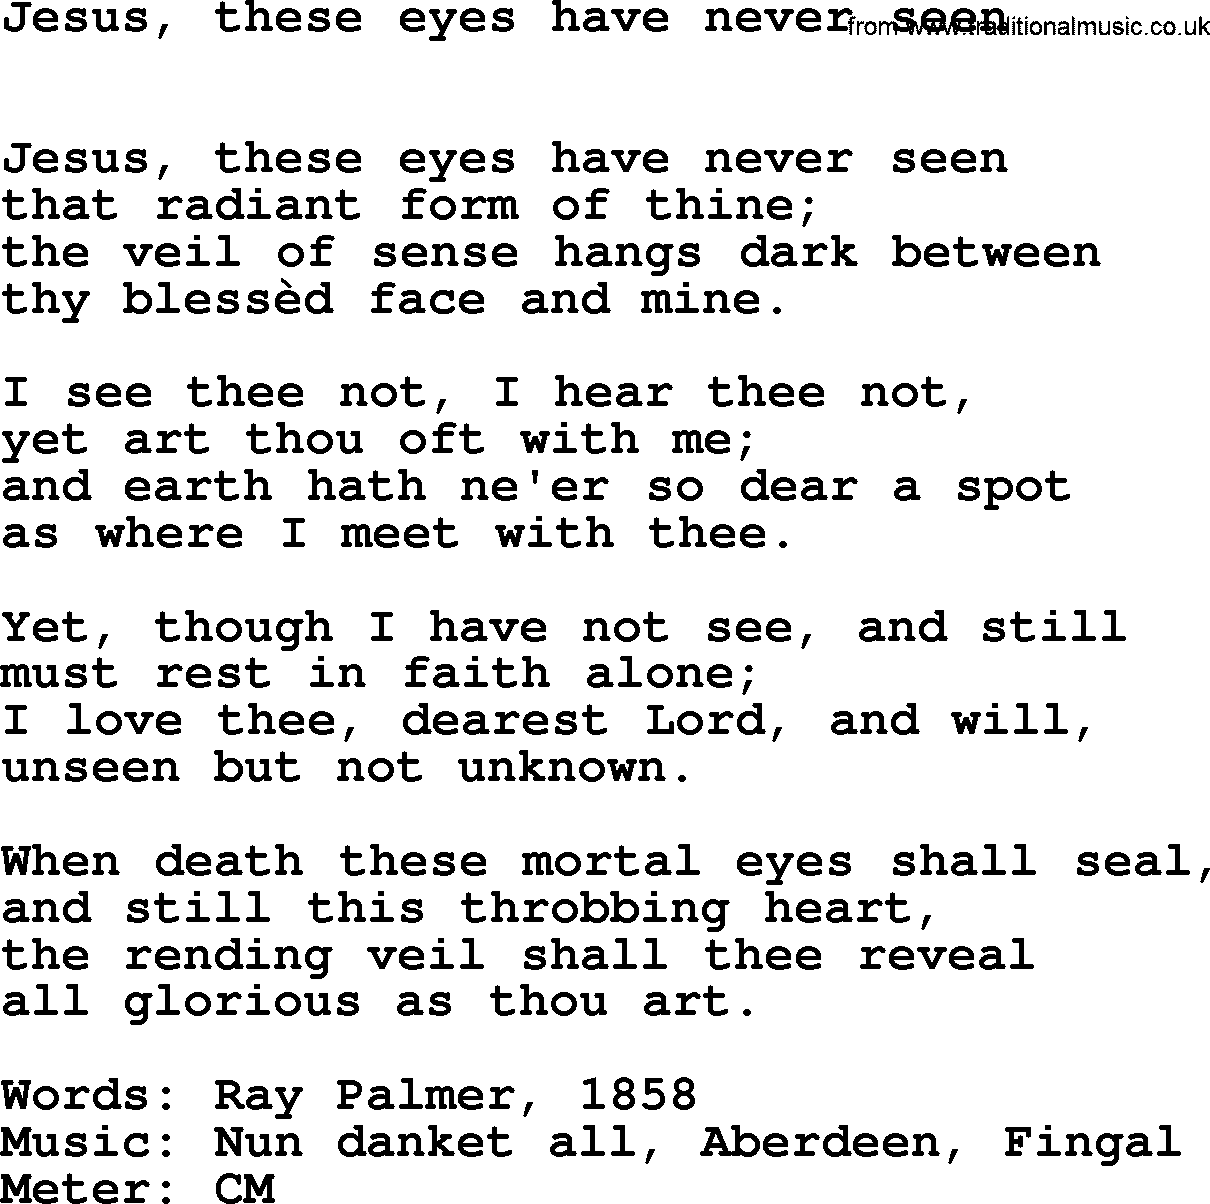 Book of Common Praise Hymn: Jesus, These Eyes Have Never Seen.txt lyrics with midi music